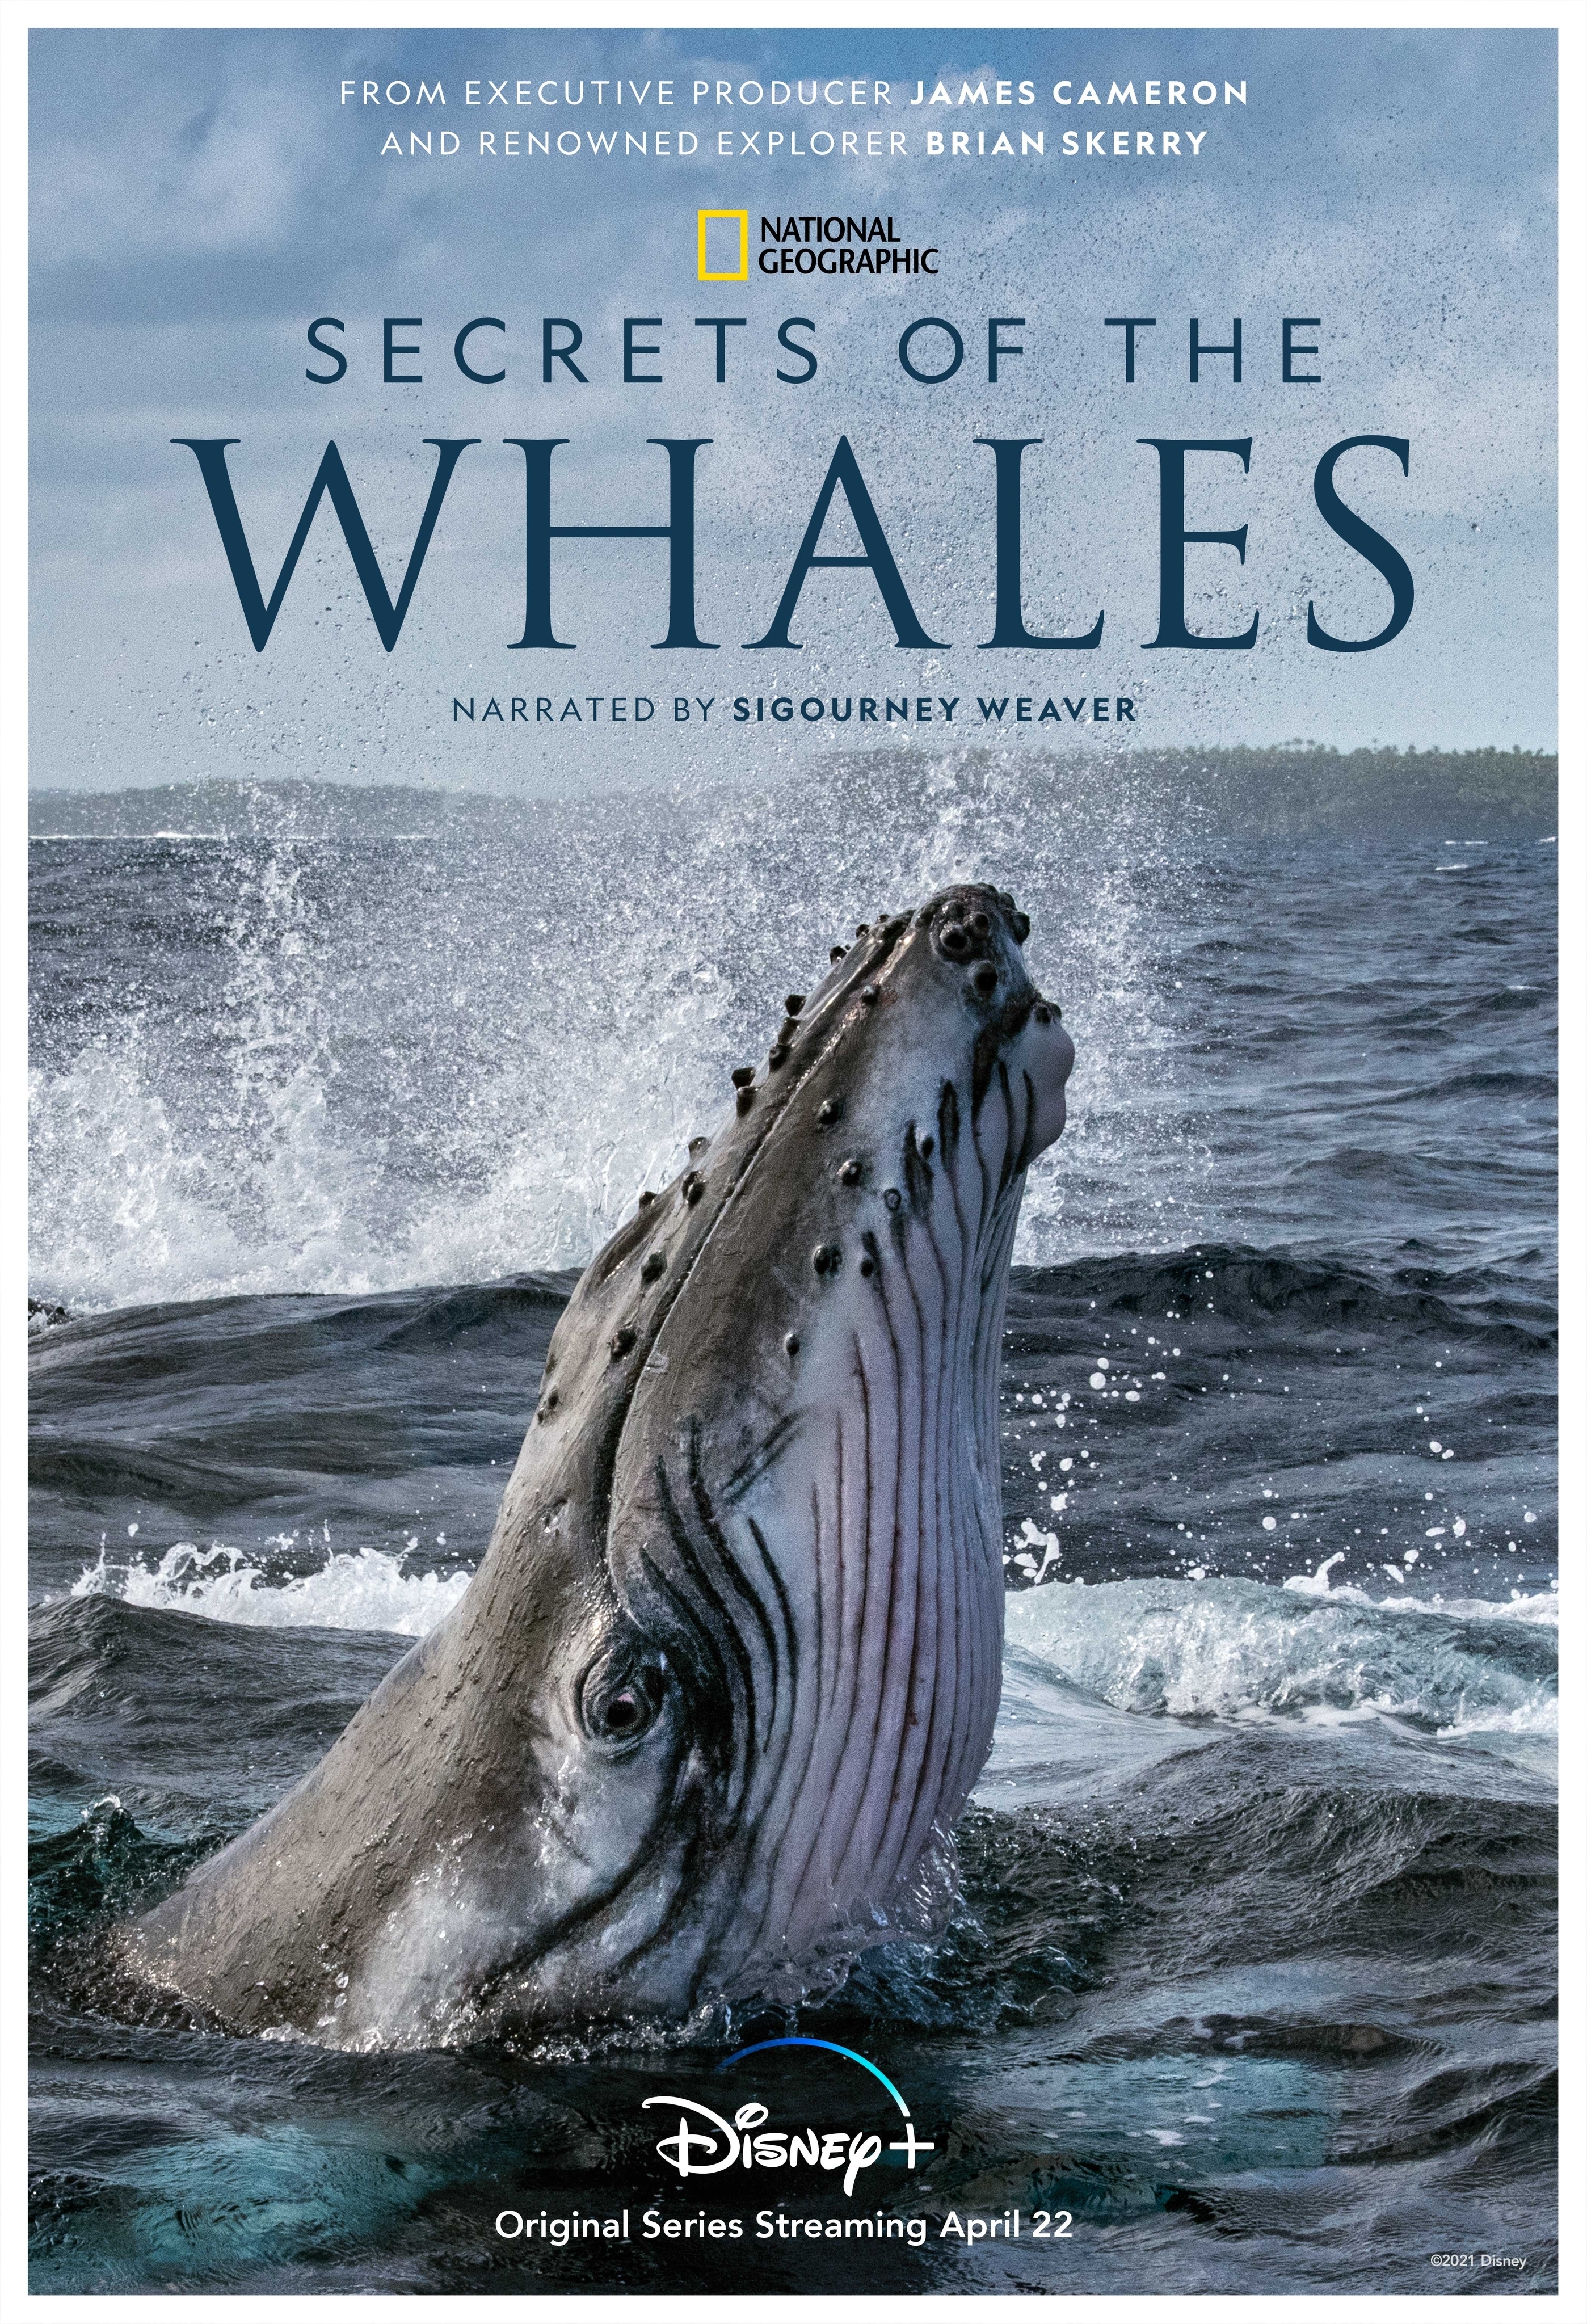 Secrets of the Whales on Disney+